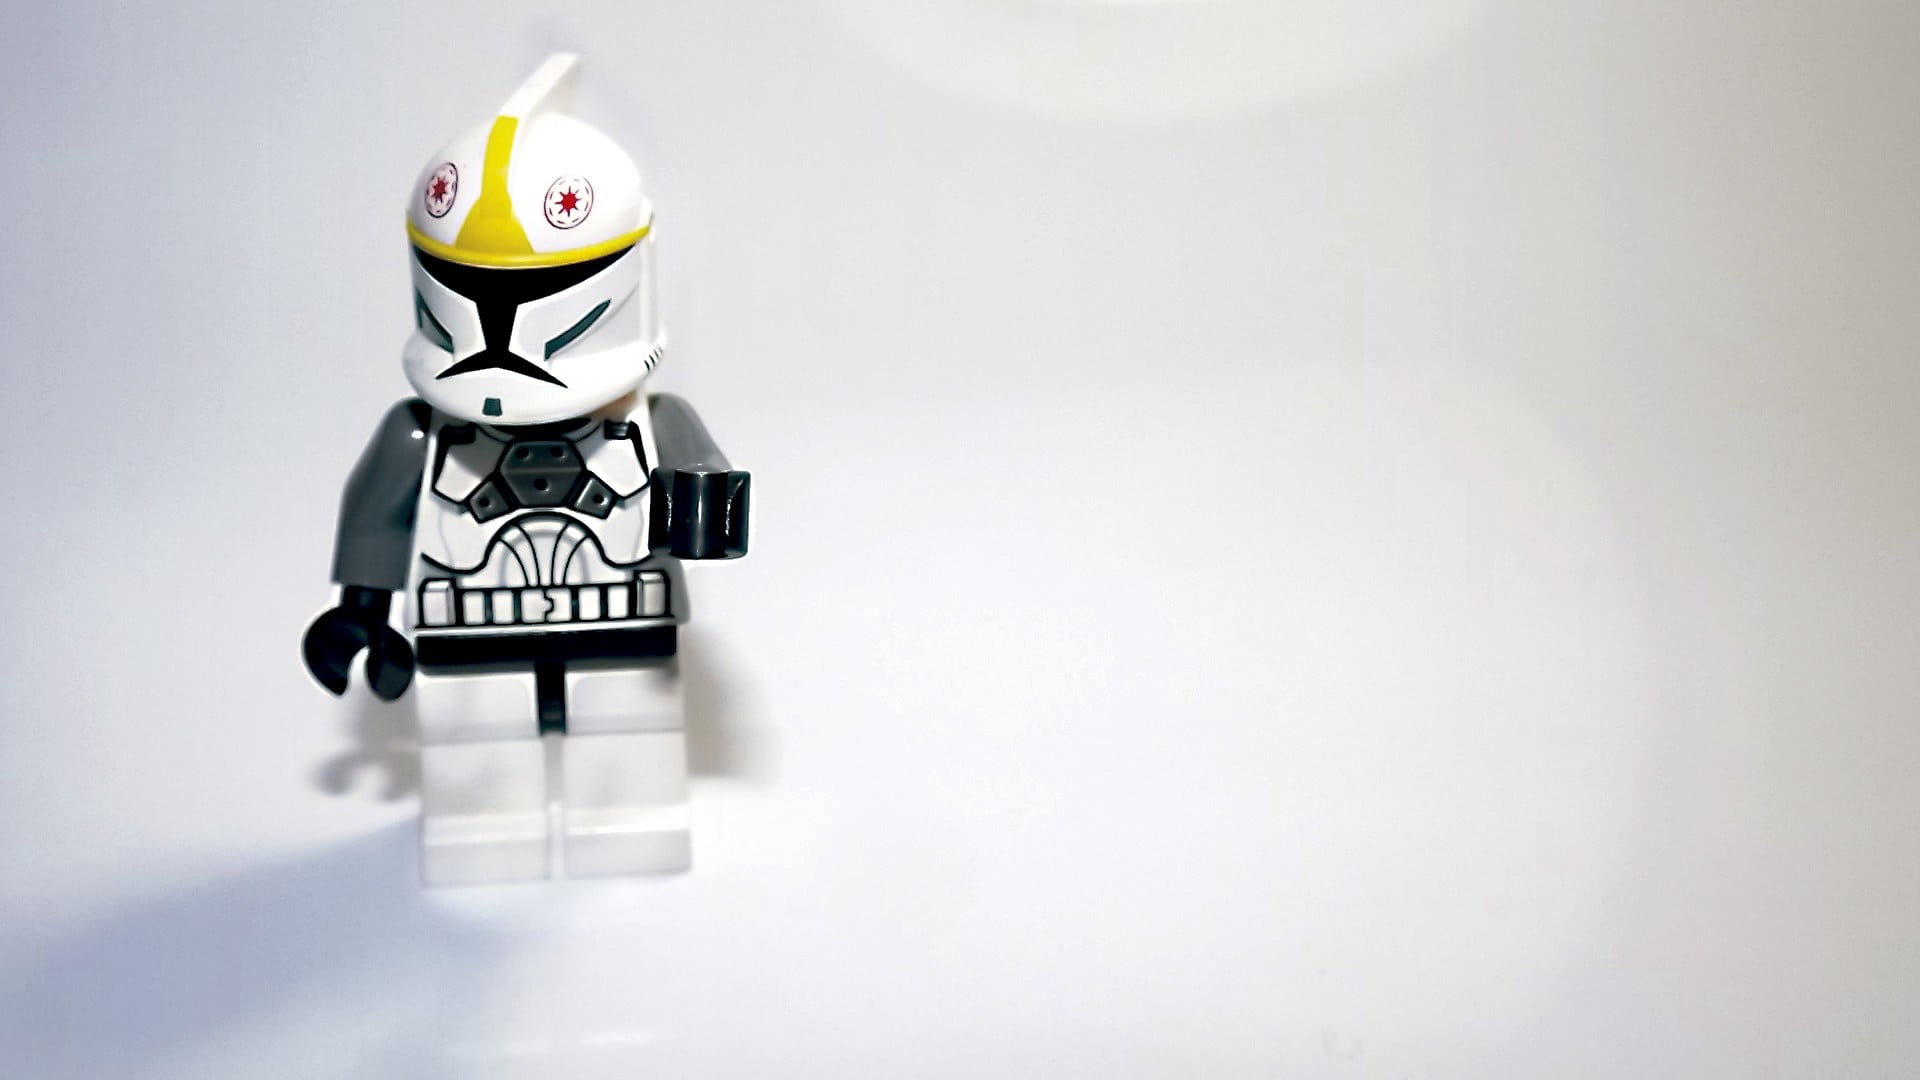 White and black Lego mini action figure Star Wars LEGO Star Wars